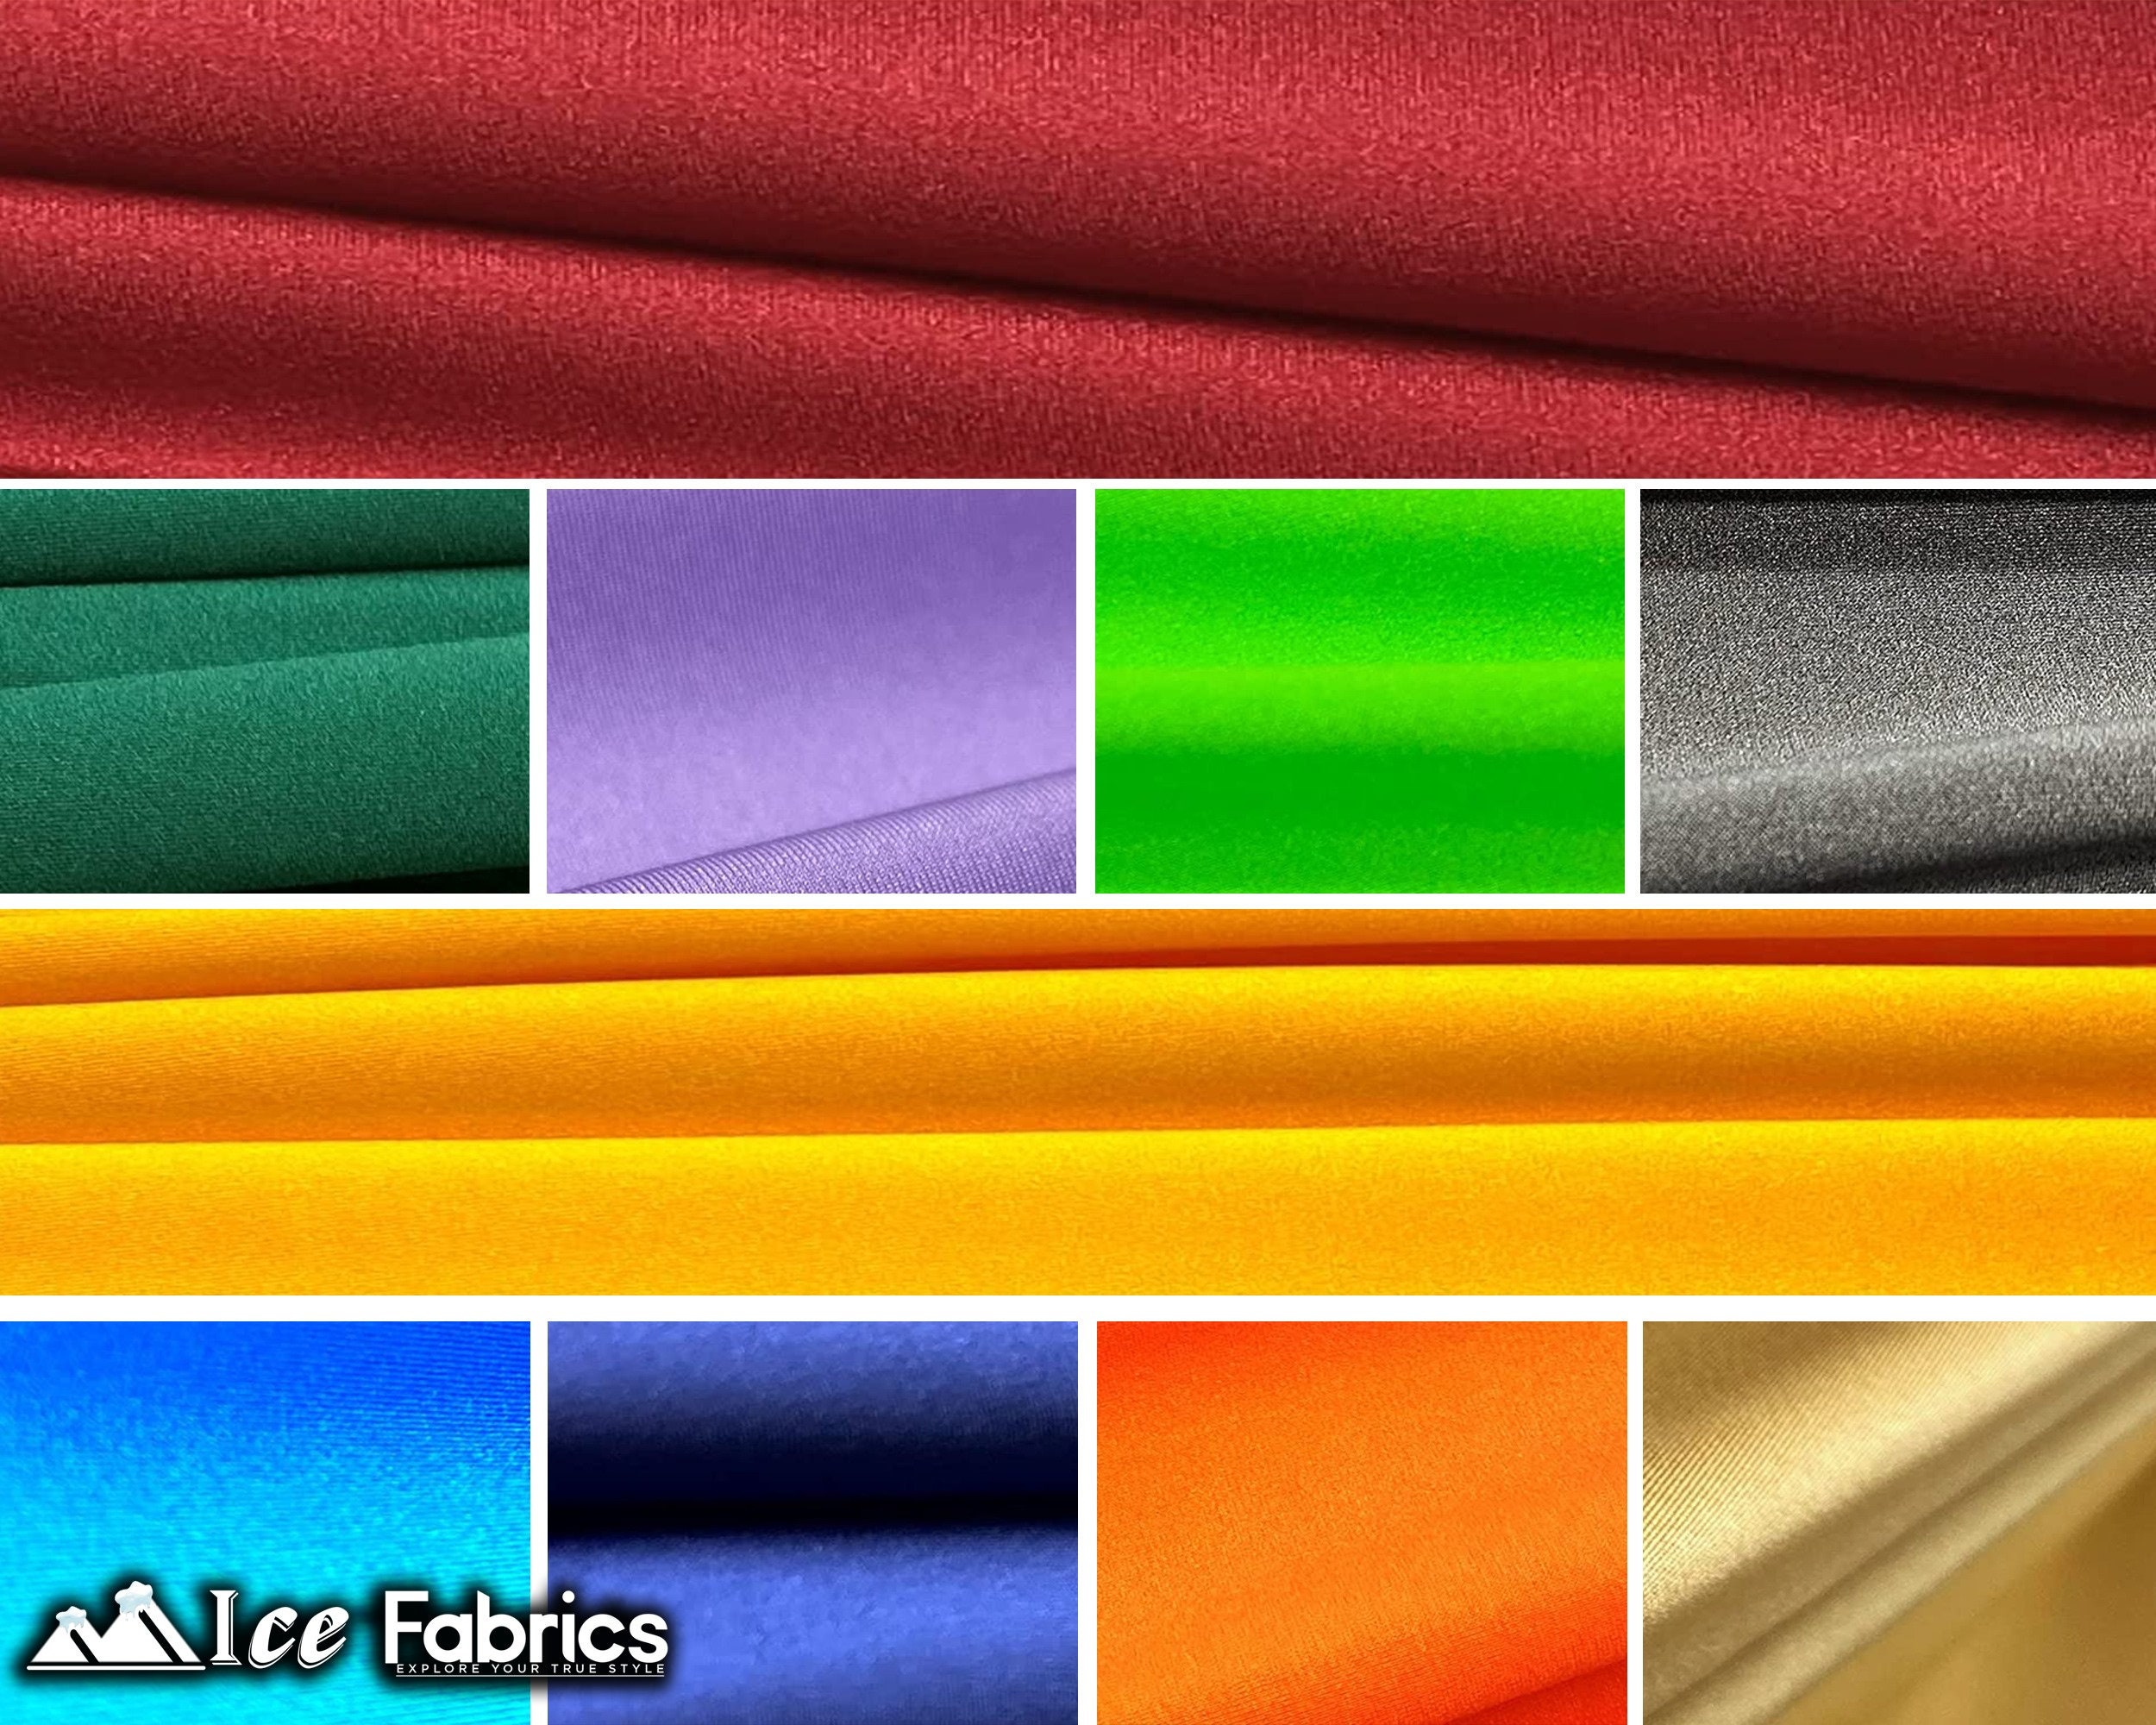 Ice Fabrics Nylon Spandex Fabric by The Yard - 60 Wide Spandex Swimwear Fabric - 4 Way Stretch Fabric for Active Wear, Yoga Pants, Table Cloth 